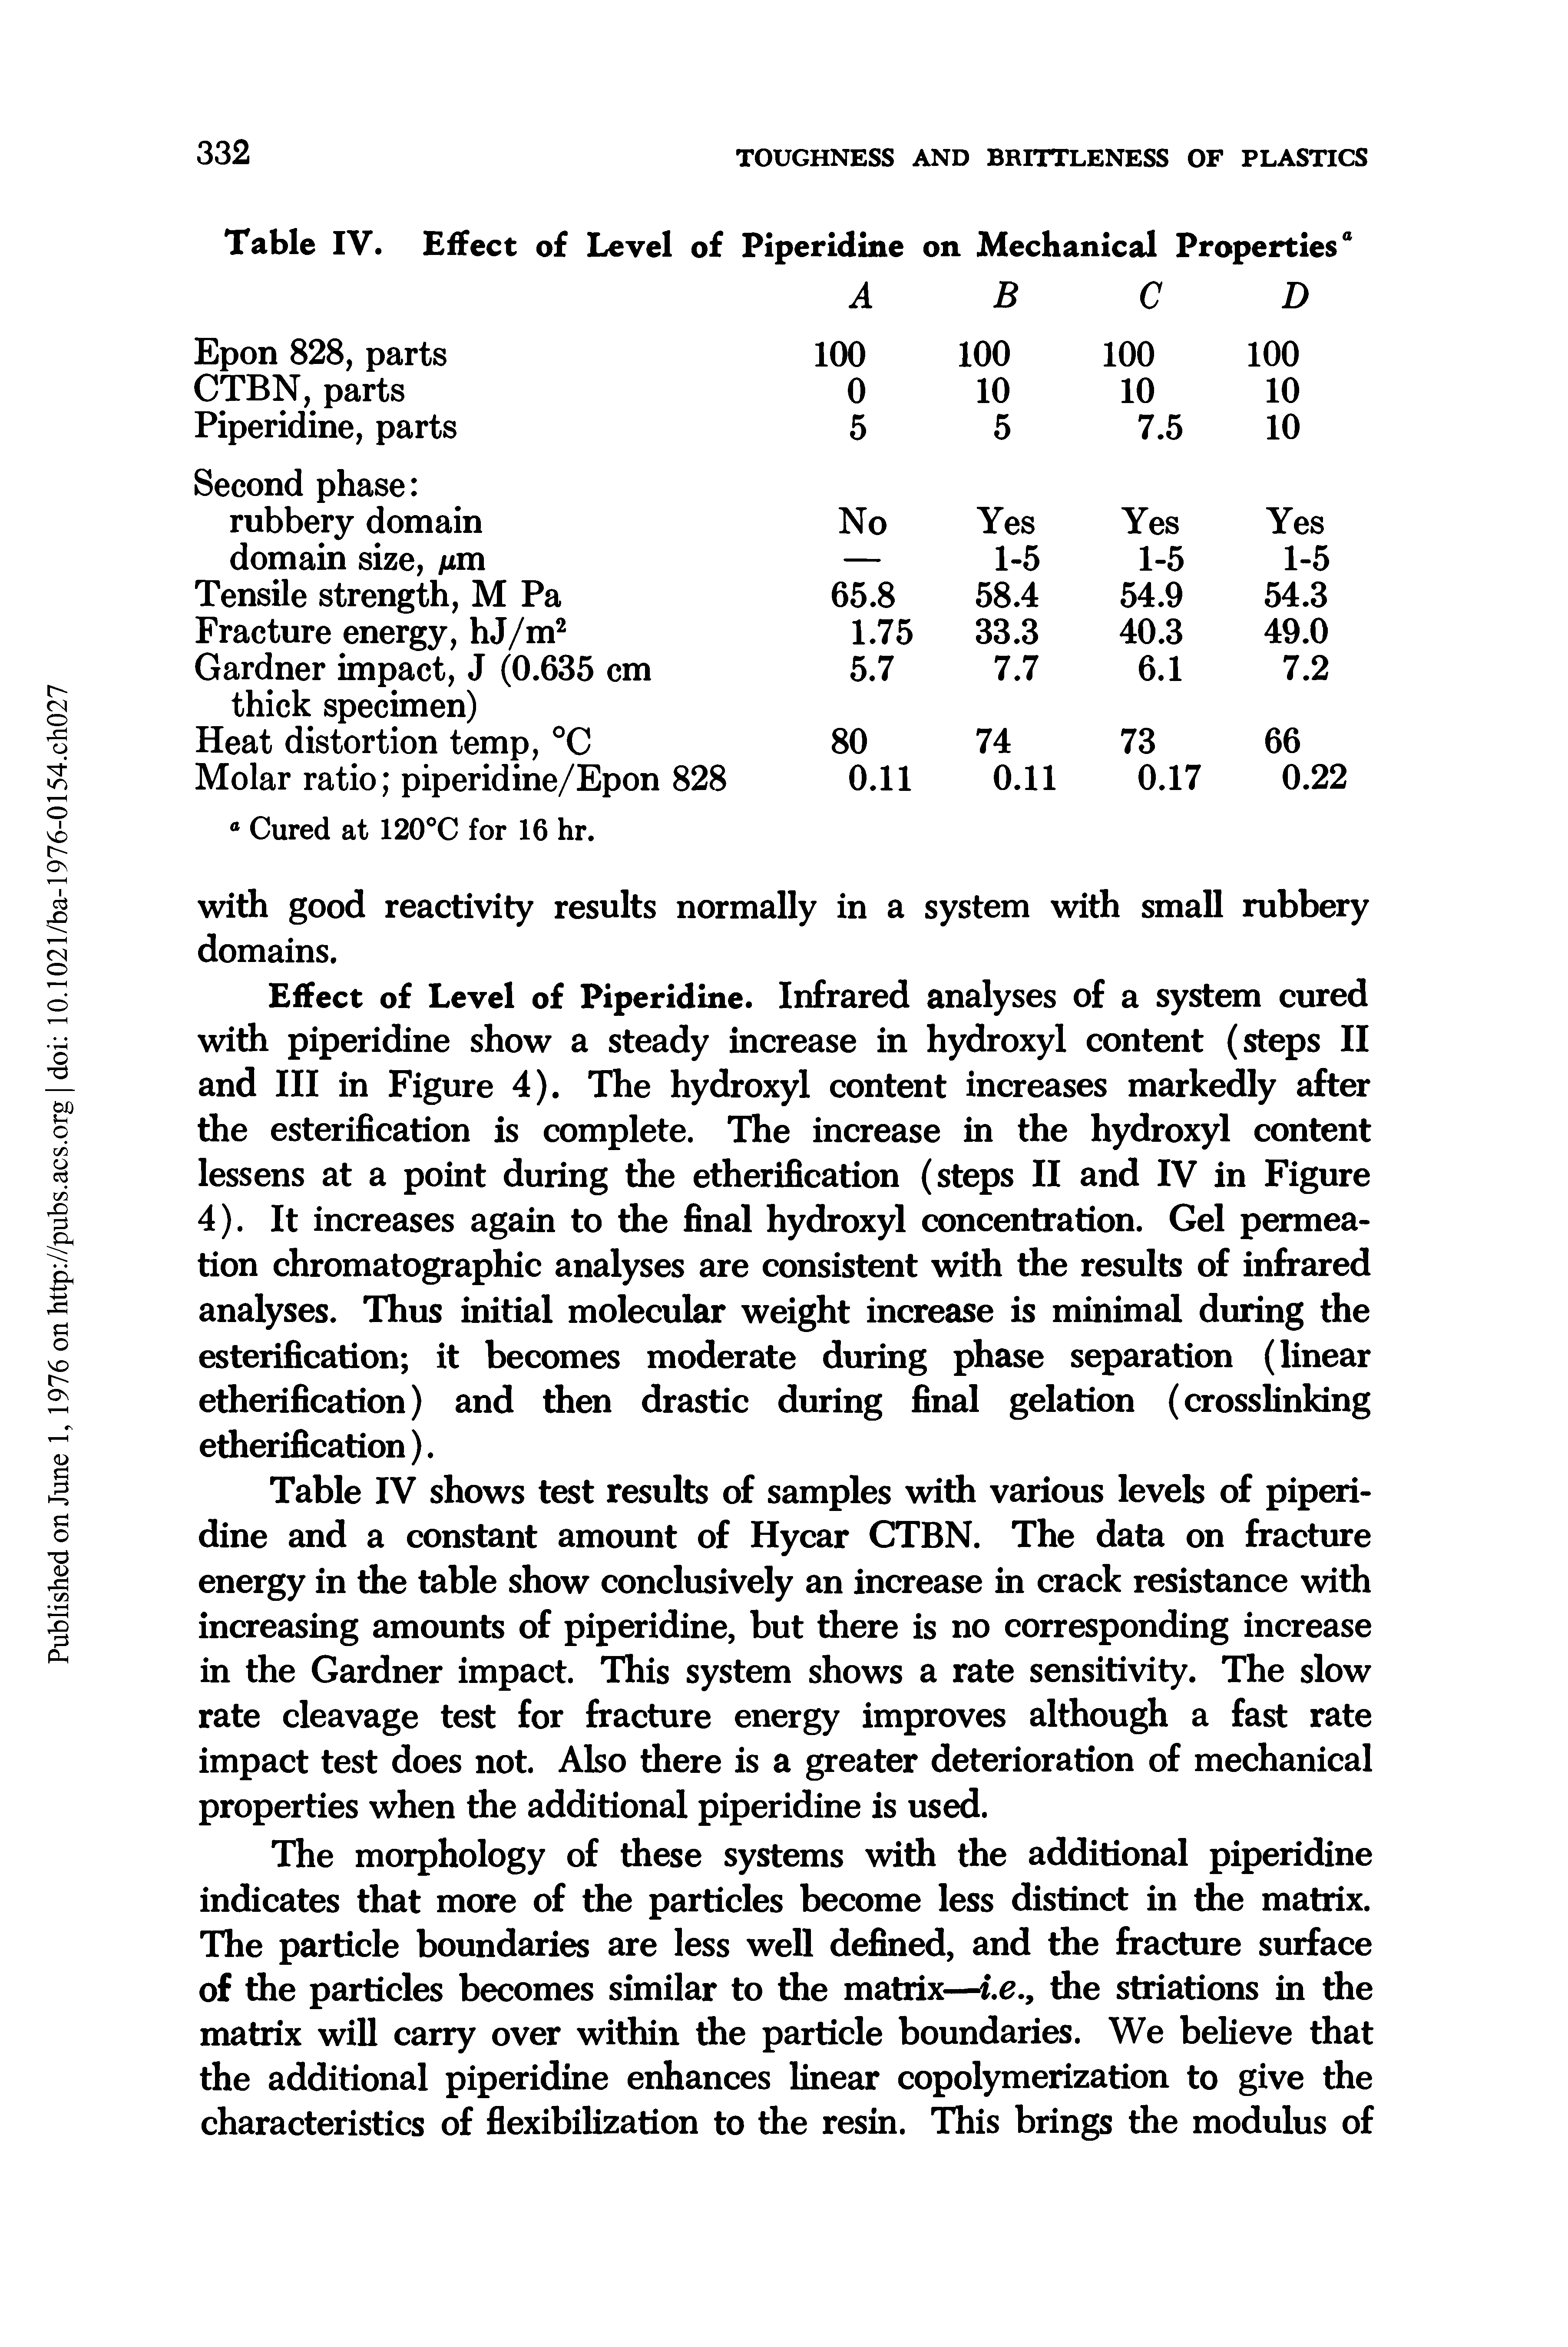 Table IV shows test results of samples with various levels of piperidine and a constant amount of Hycar CTBN. The data on fracture energy in the table show conclusively an increase in crack resistance with increasing amounts of piperidine, but there is no corresponding increase in the Gardner impact. This system shows a rate sensitivity. The slow rate cleavage test for fracture energy improves although a fast rate impact test does not. Also there is a greater deterioration of mechanical properties when the additional piperidine is used.